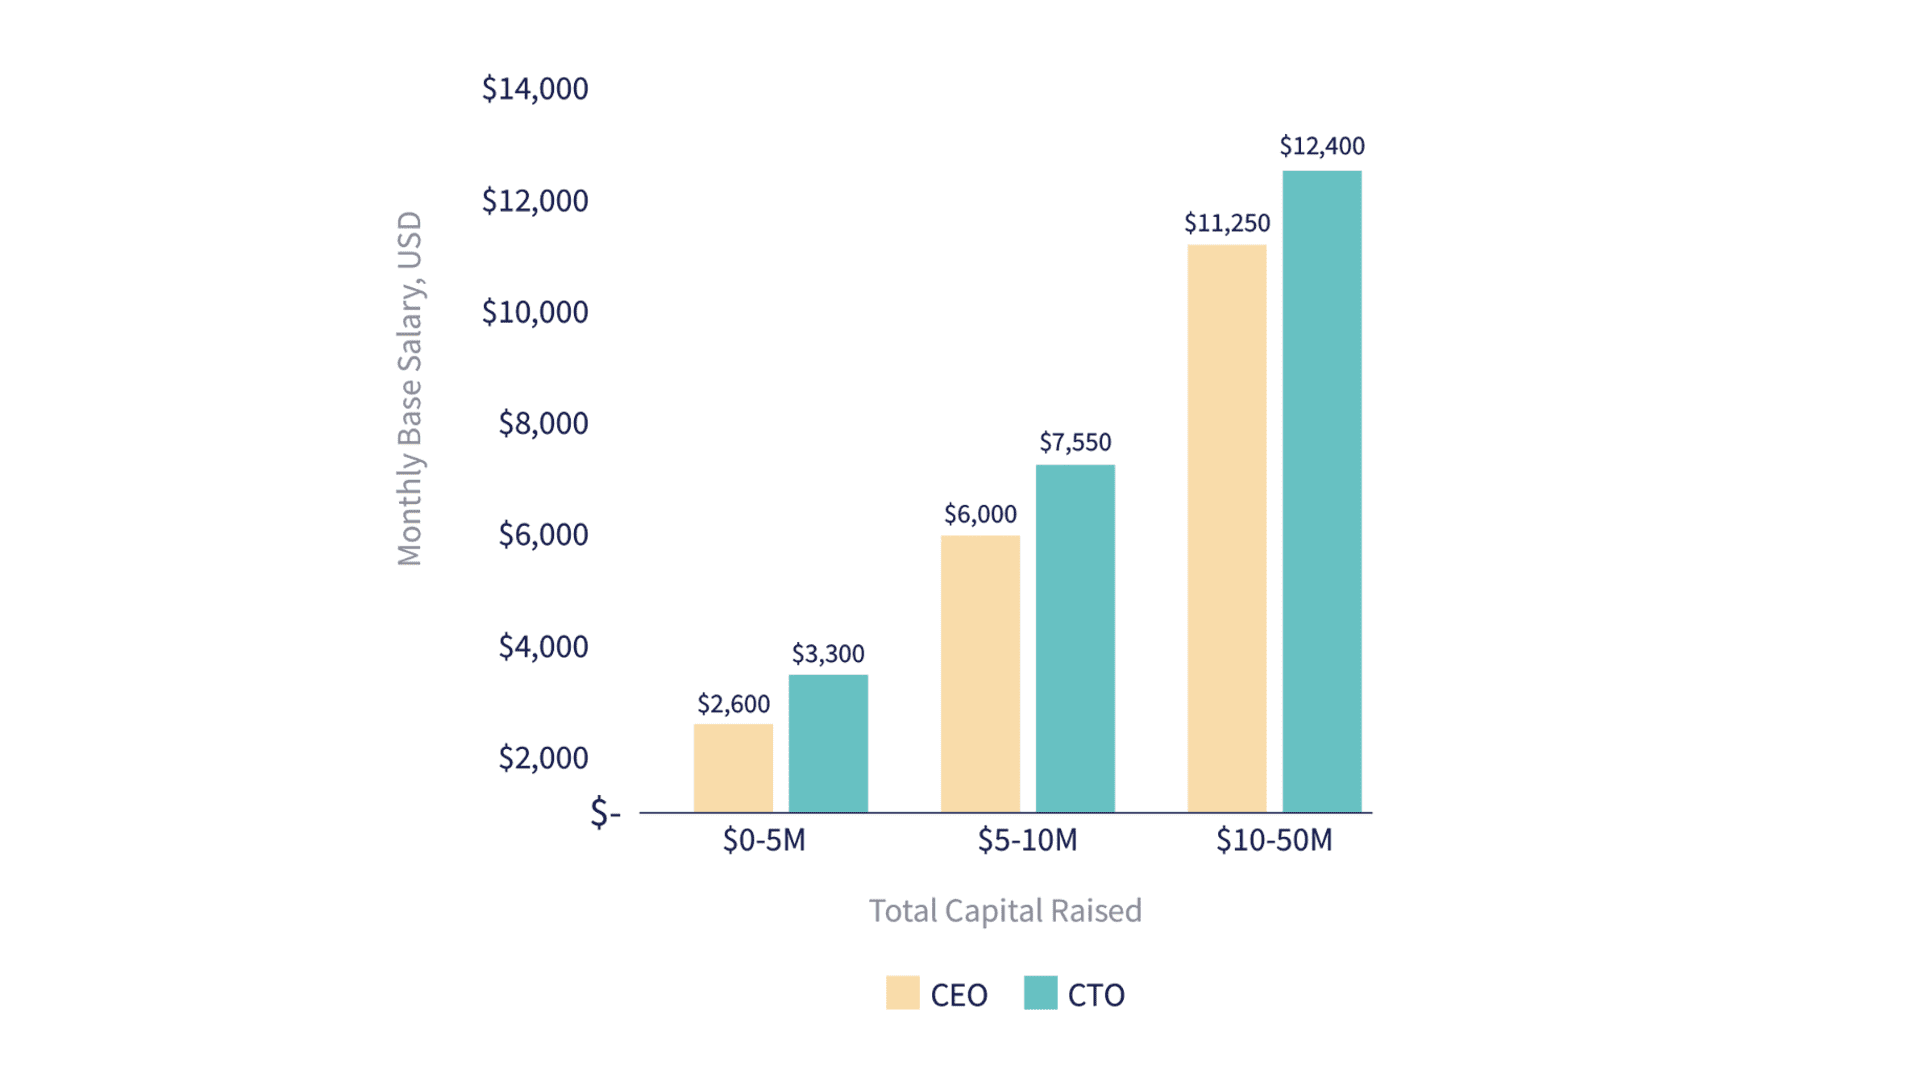 Median base monthly salaries (USD) for CEOs and CTOs of Southeast Asian start-ups, based on funding stage.